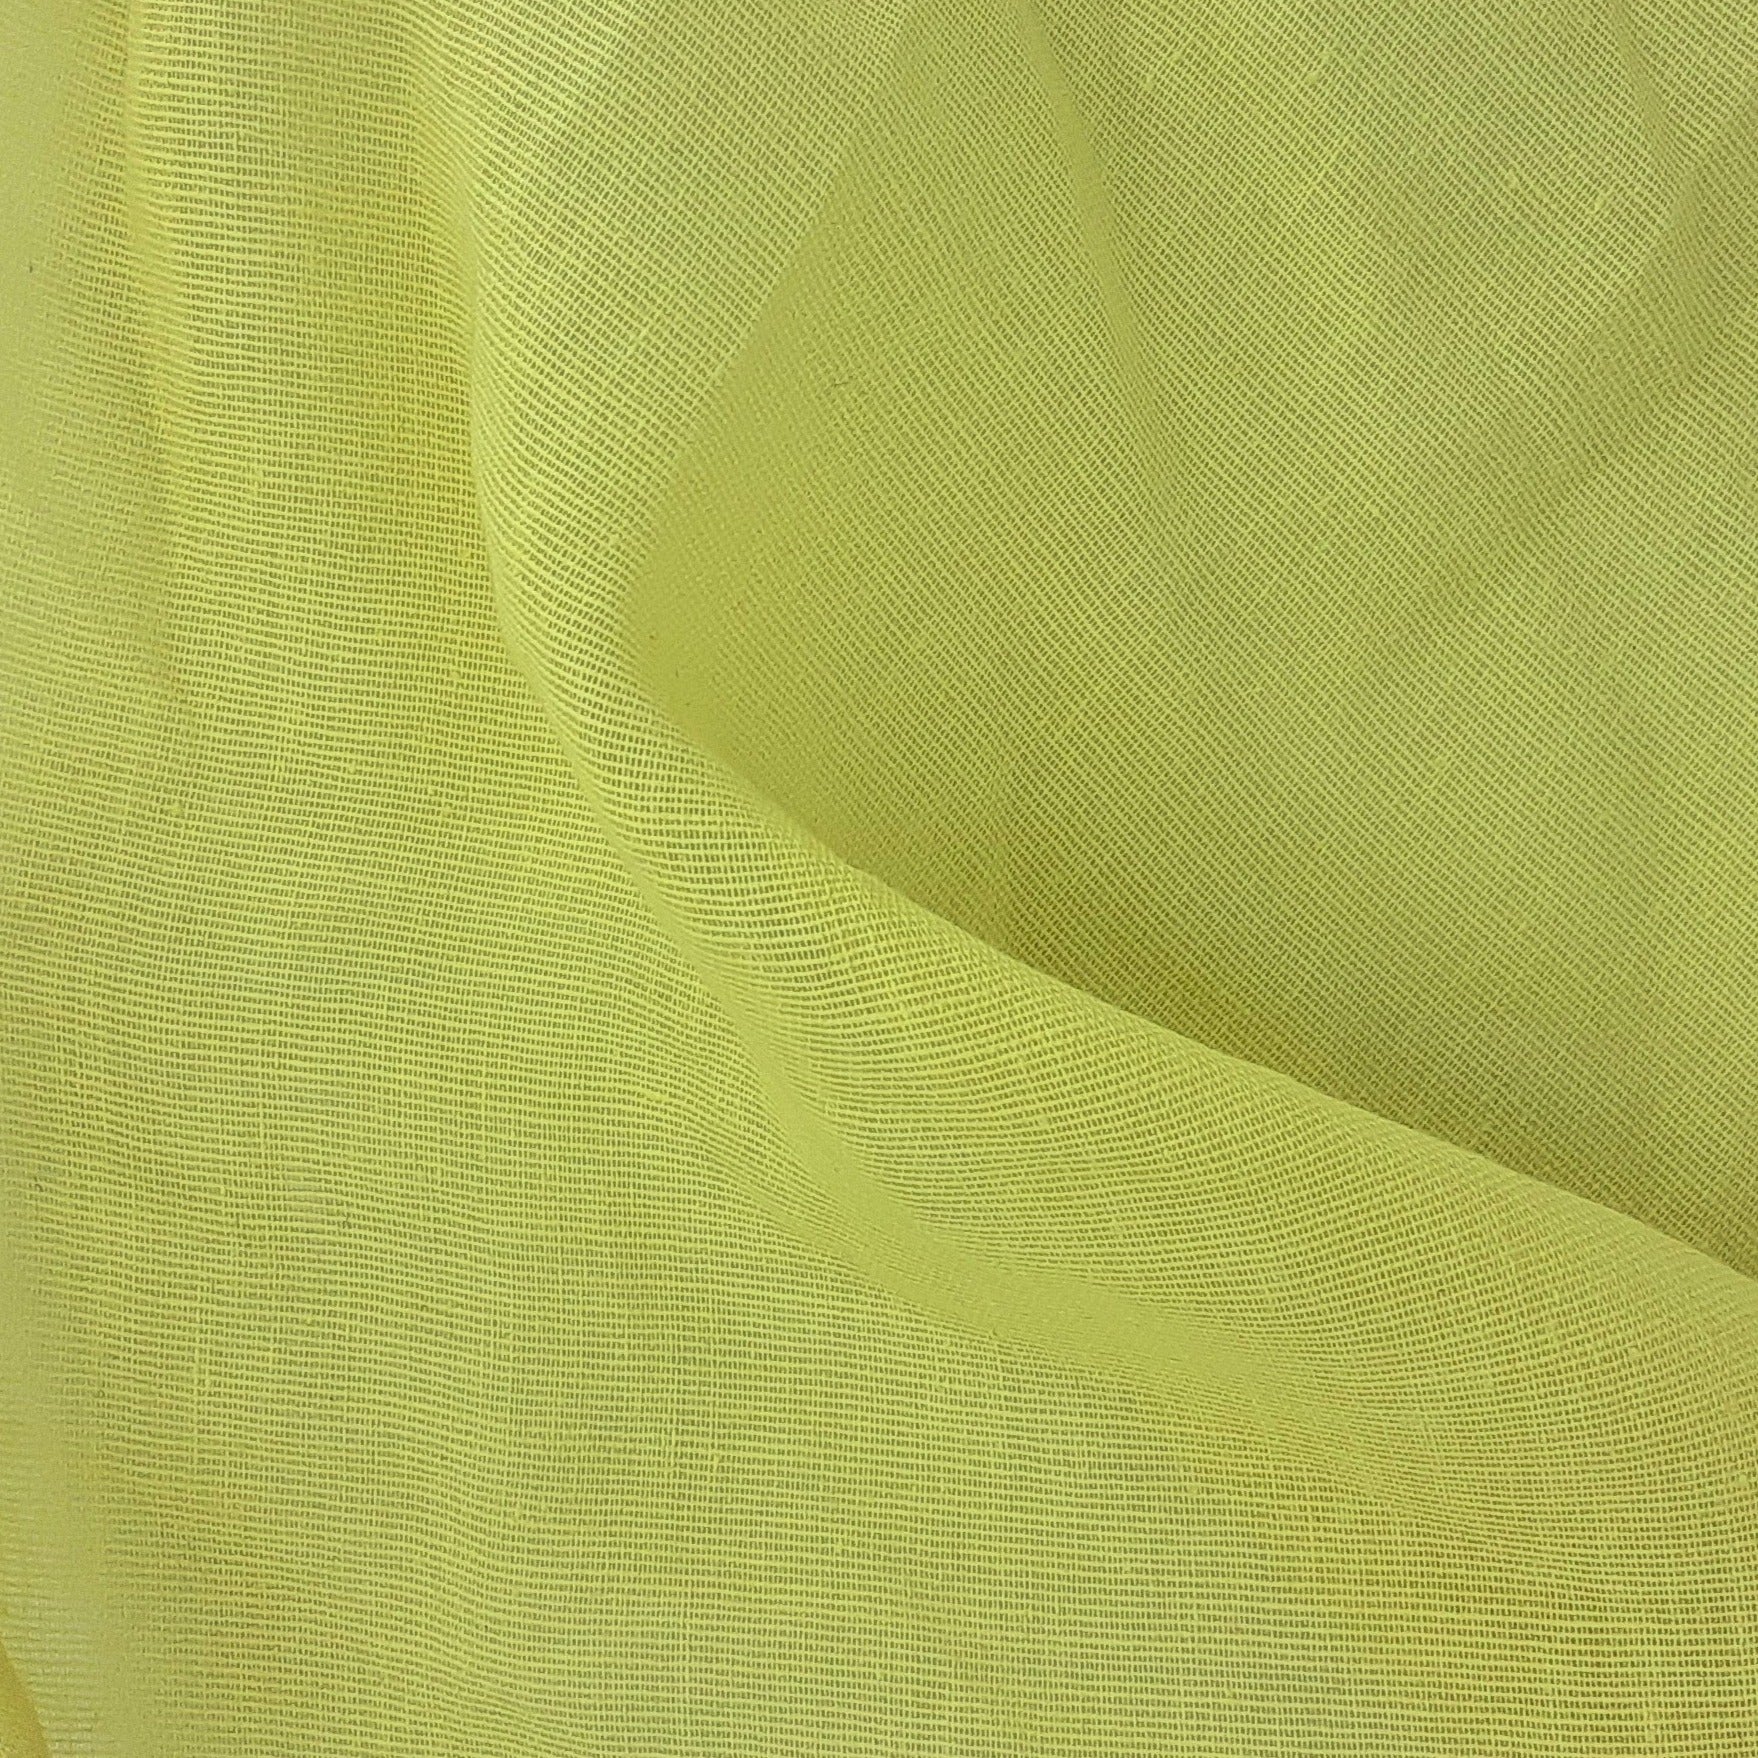 Yellow #S Voile 100% Cotton Woven Fabric - SKU 6711